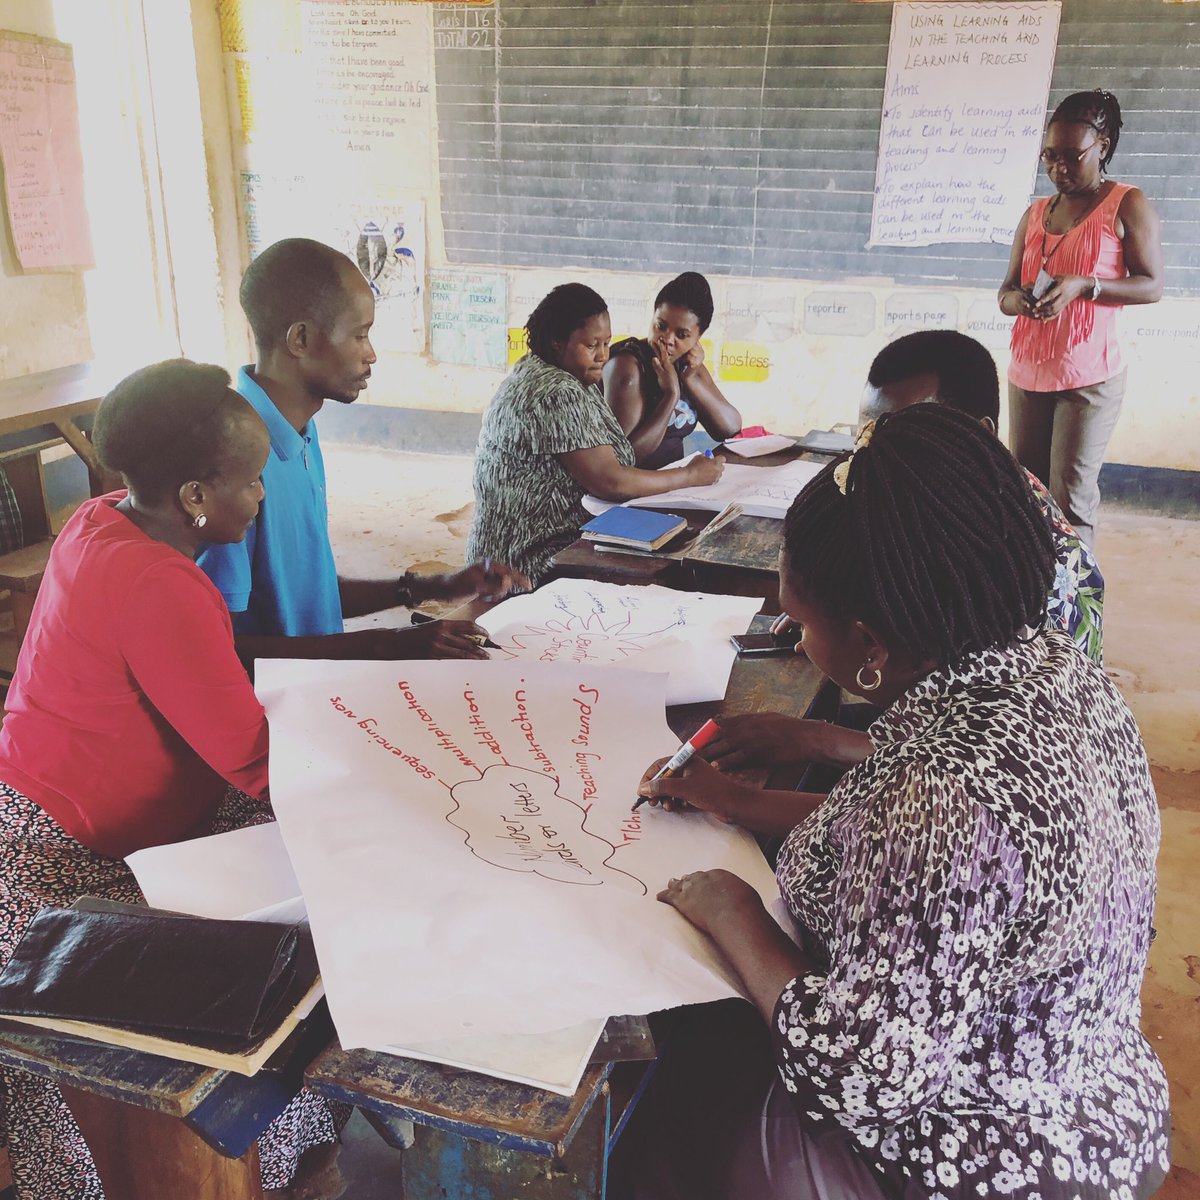 Janet, Redearth Project Manager, training teachers at Masindi Junior. The subject - ‘Using learning aids in the teaching and learning process and how these different aids can be used’

#teachertraining #teachingaids #teachersfollowteachers #education #masindischools #uganda 🇺🇬